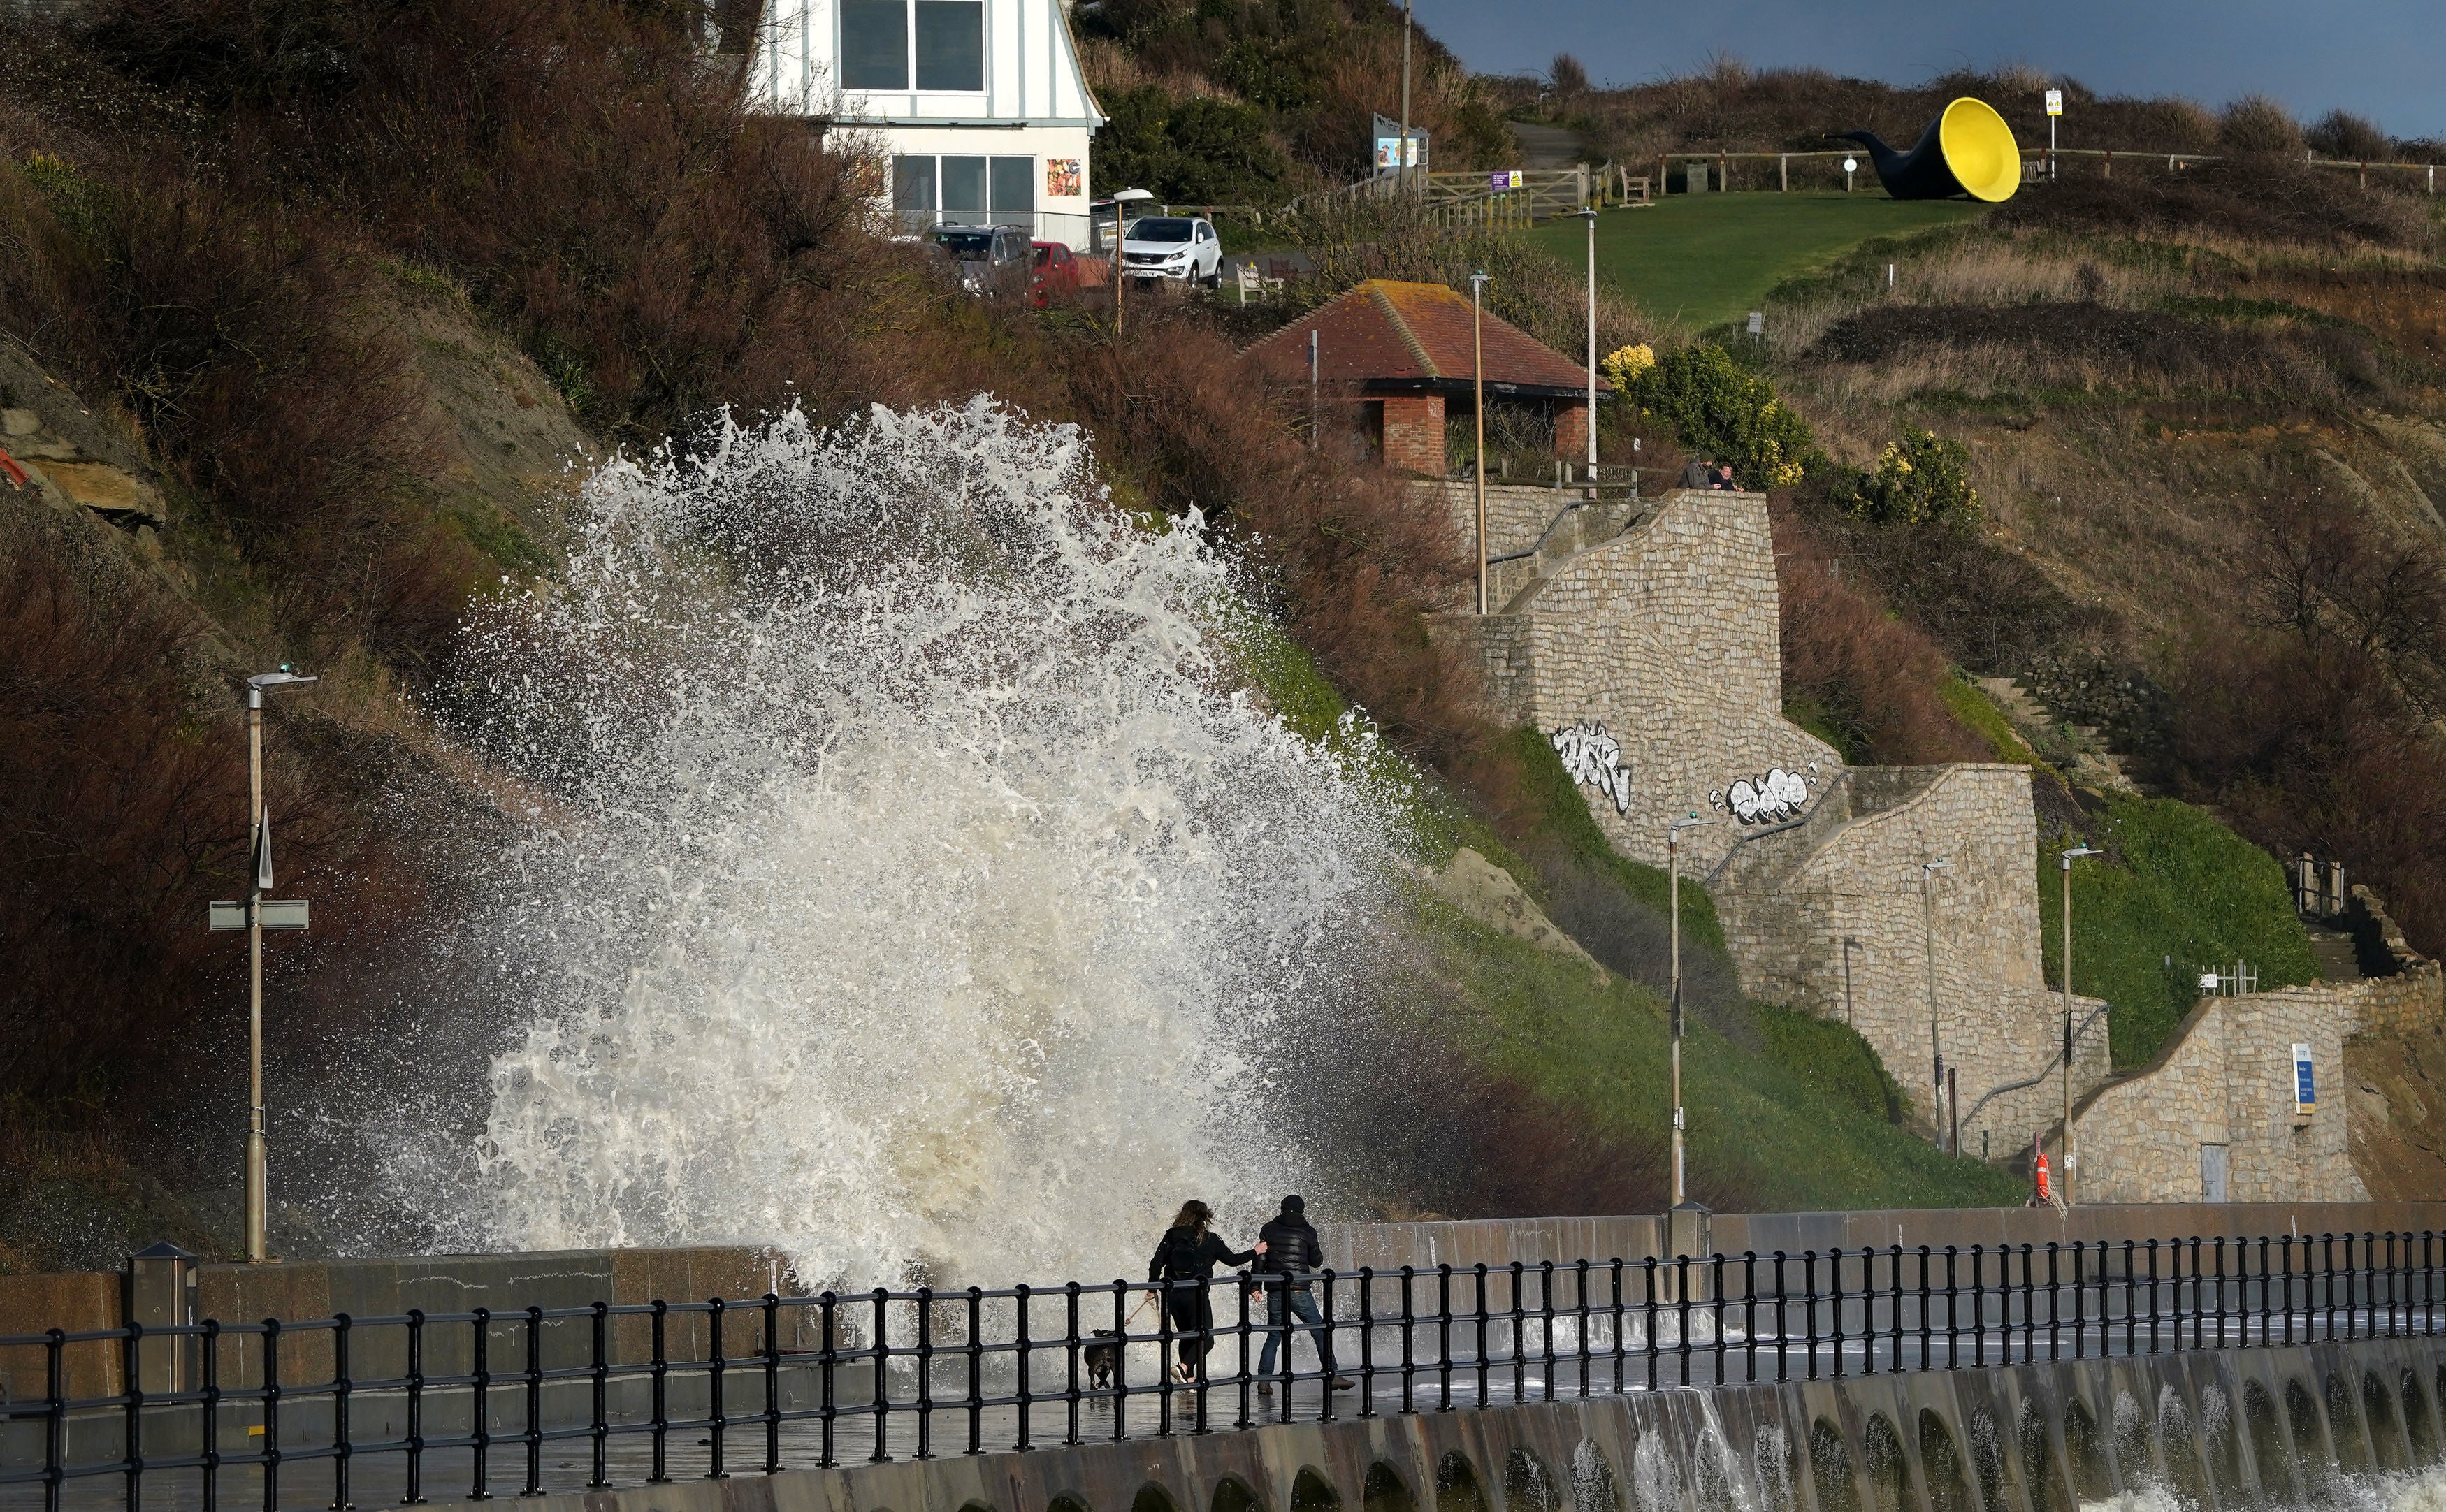 A couple are hit by a wave during strong winds on the promenade in Folkestone, Kent